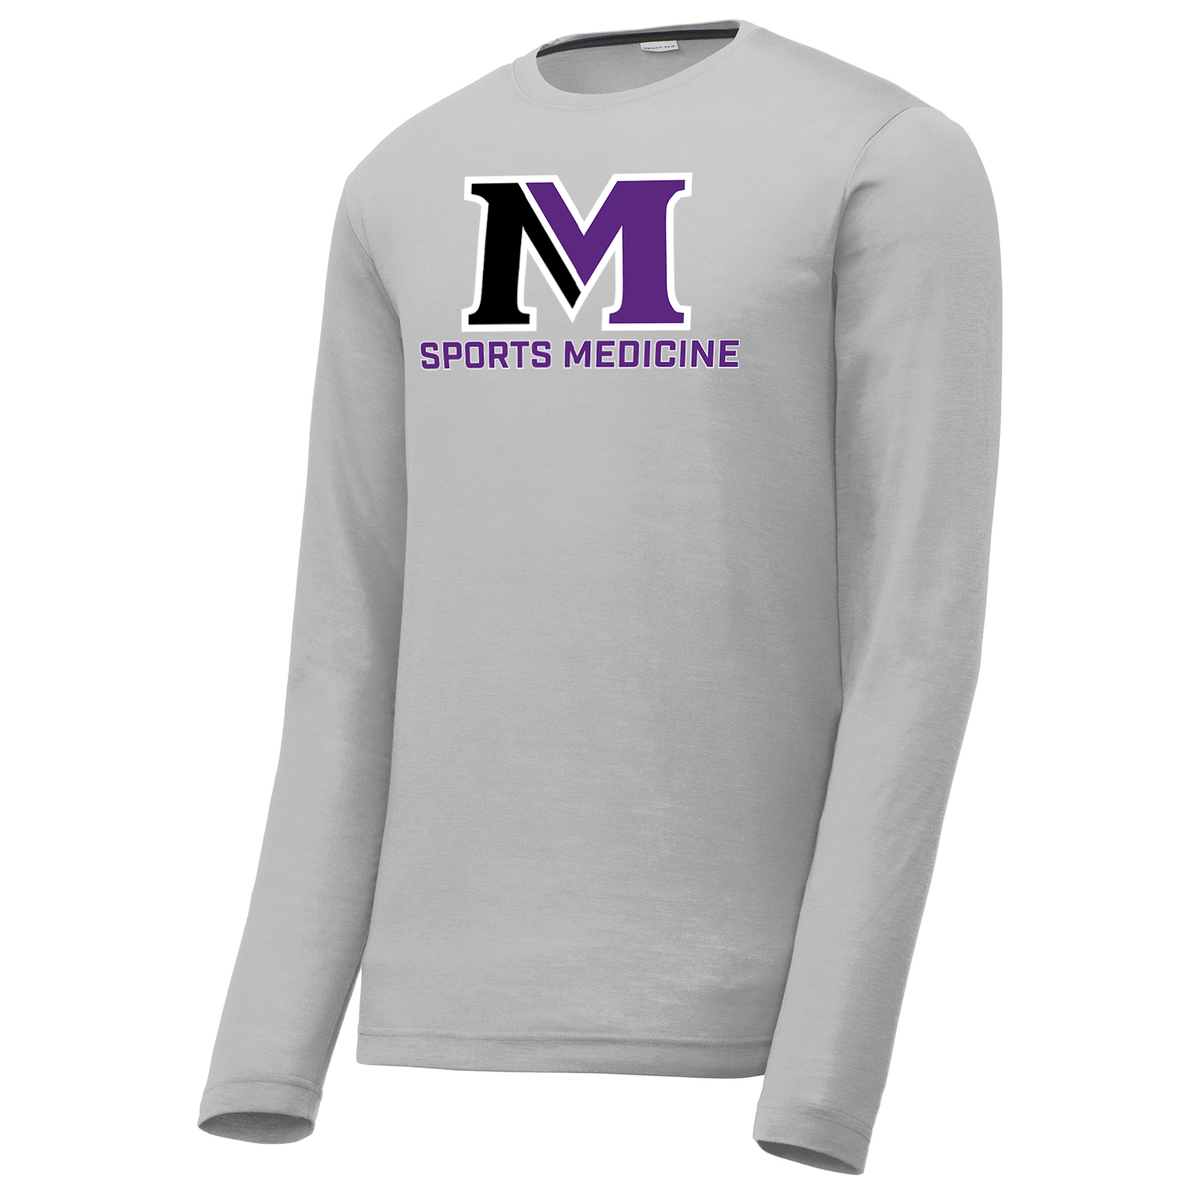 Masters School Long Sleeve CottonTouch Performance Shirt